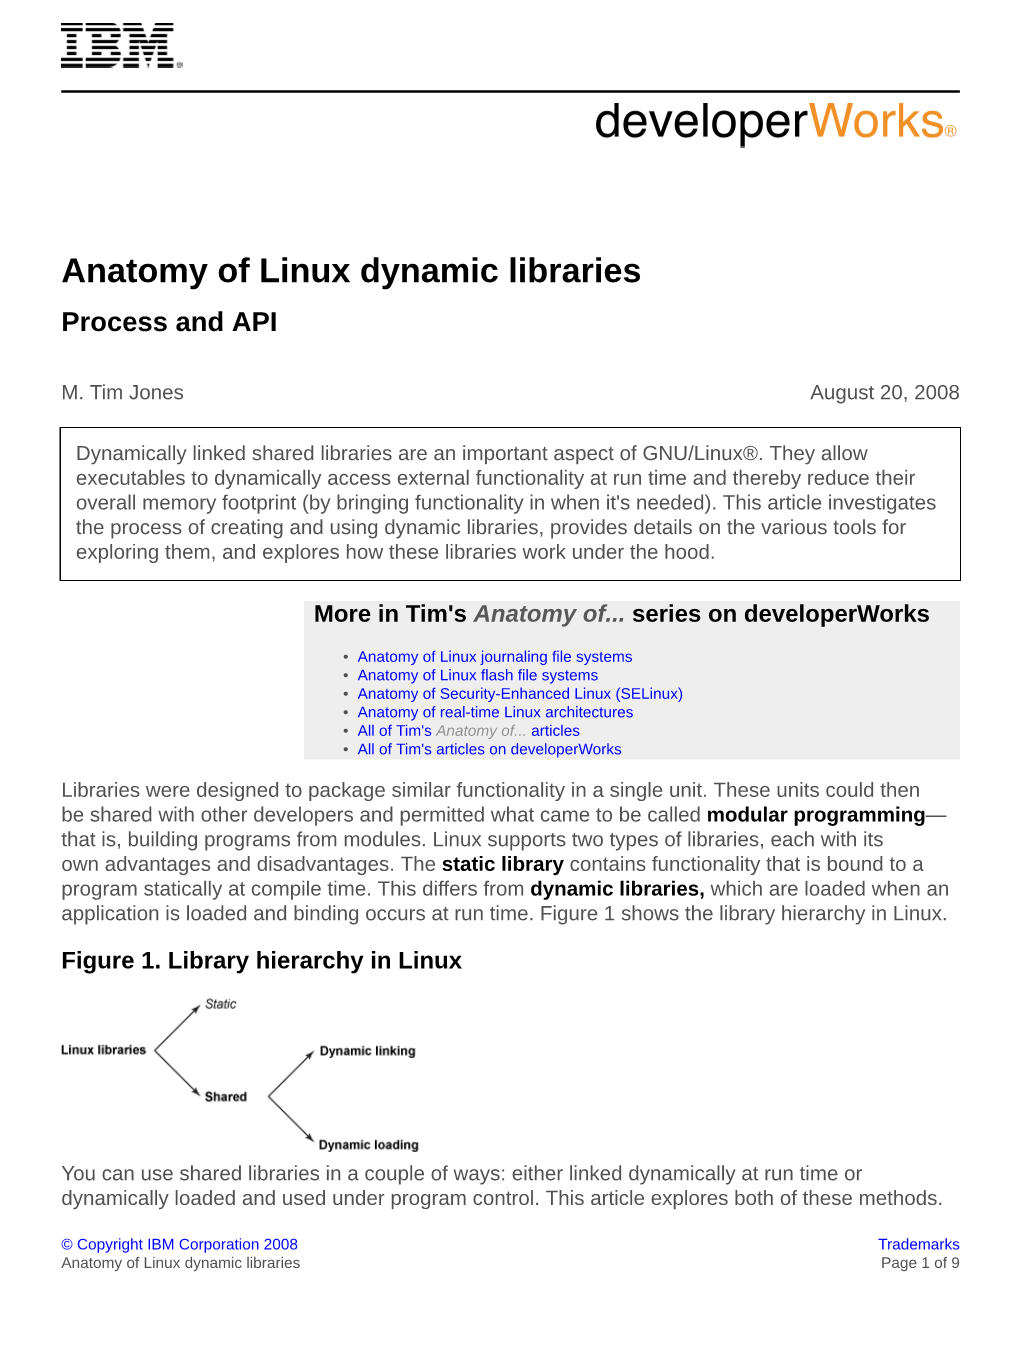 Anatomy of Linux Dynamic Libraries Process and API